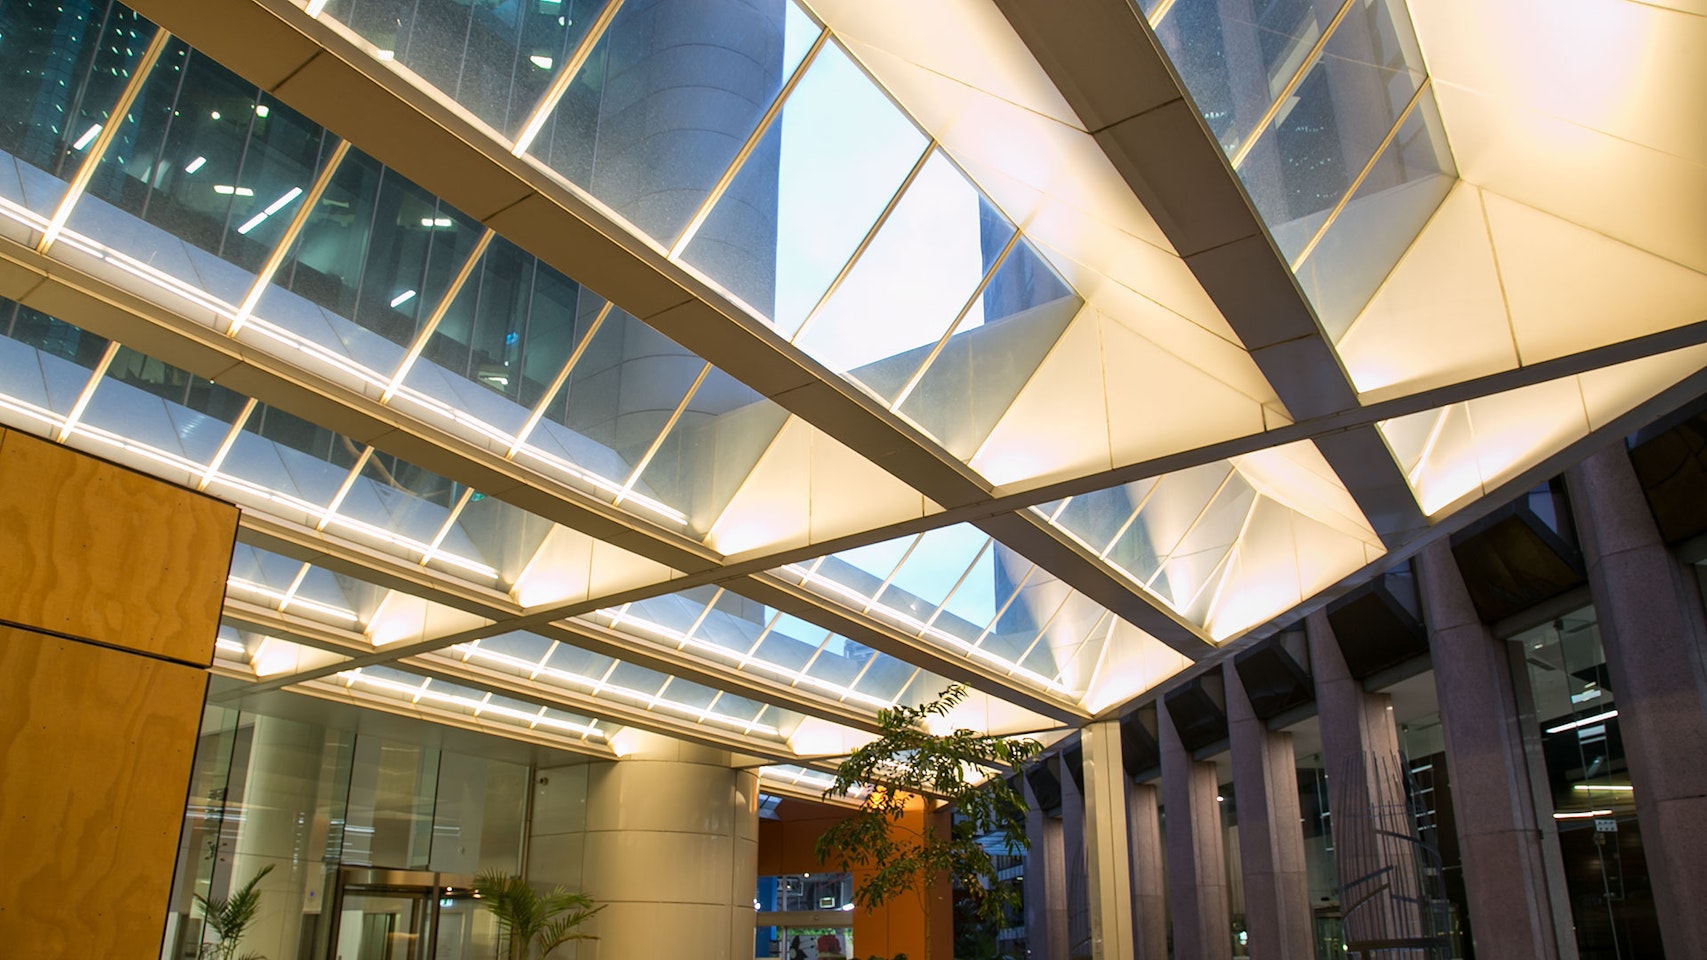 The Alto IP proved to be the ideal high power LED strip to illuminate this monolithic architectural canopy.